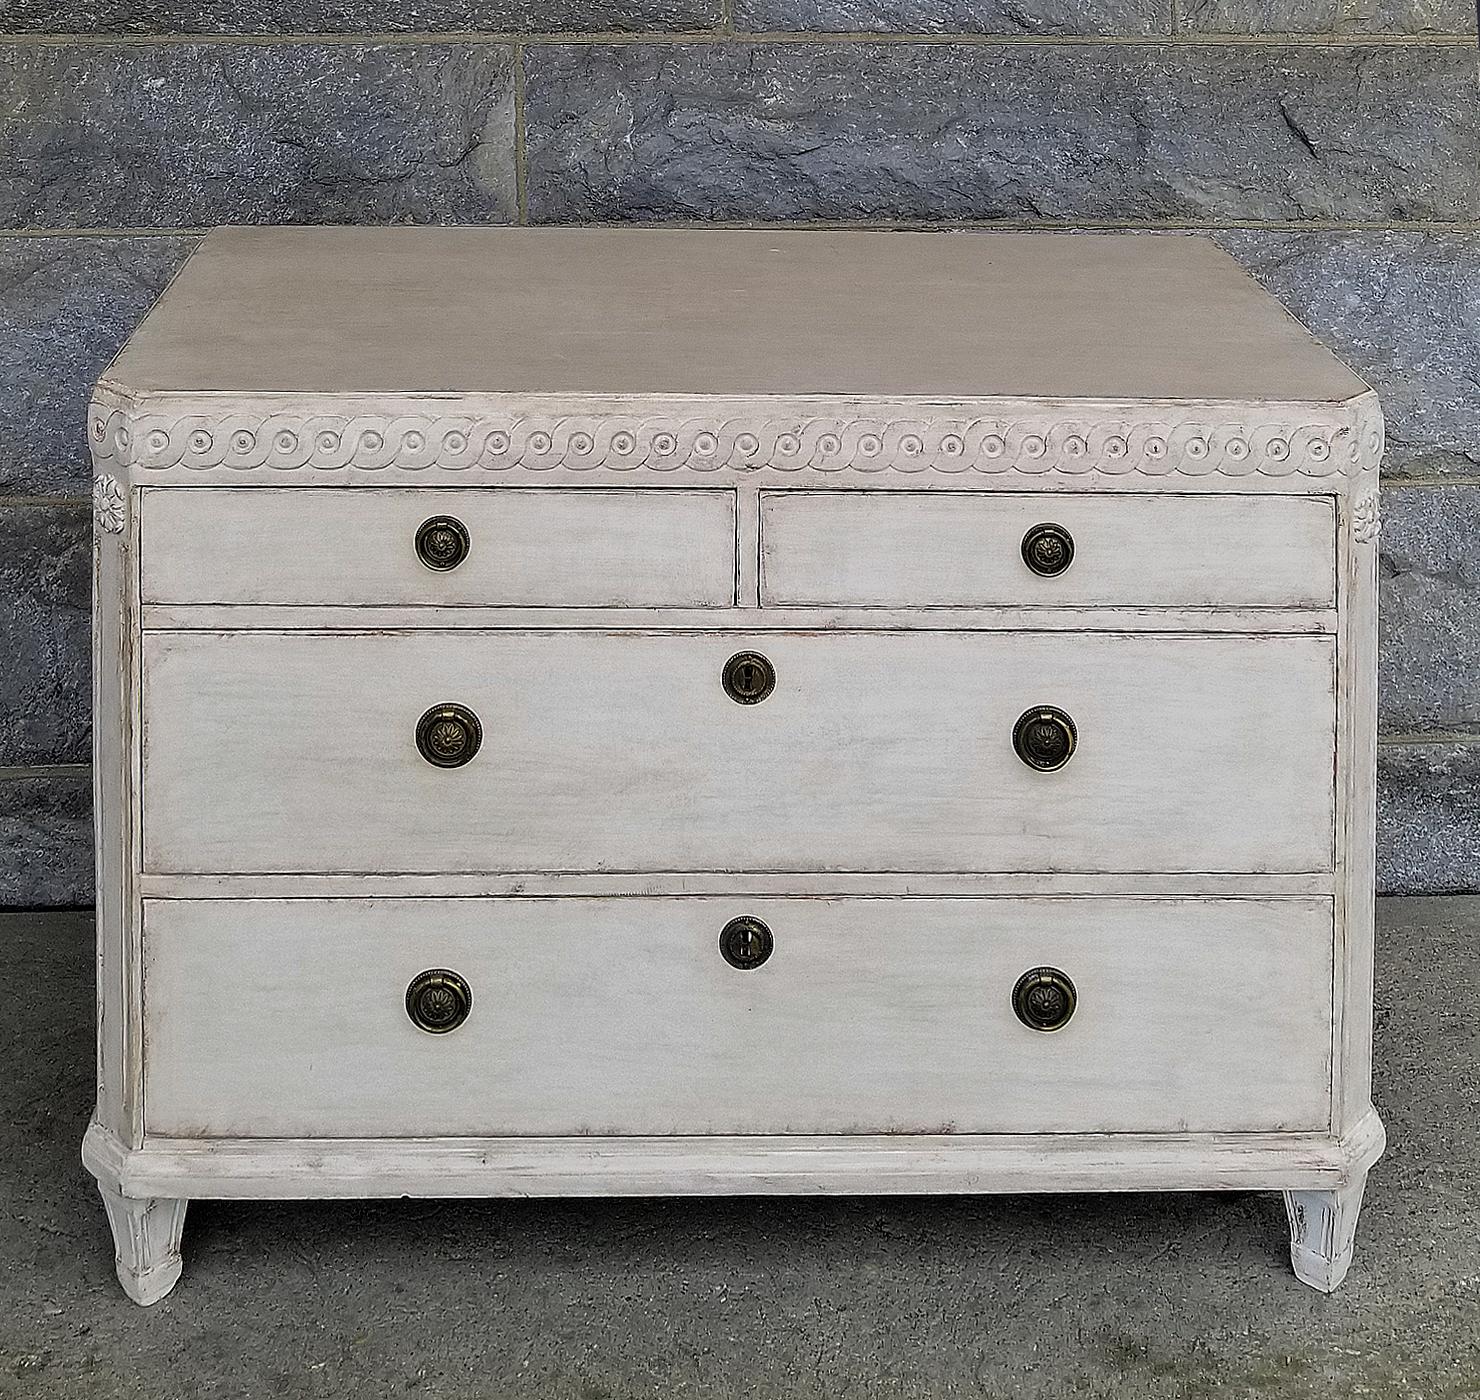 Gustavian style chest of drawers, Sweden circa 1880, with two over two drawers. Guilloche carving around the top, canted corners with applied rosettes, and tapering square feet. No repairs to this typically Swedish piece.